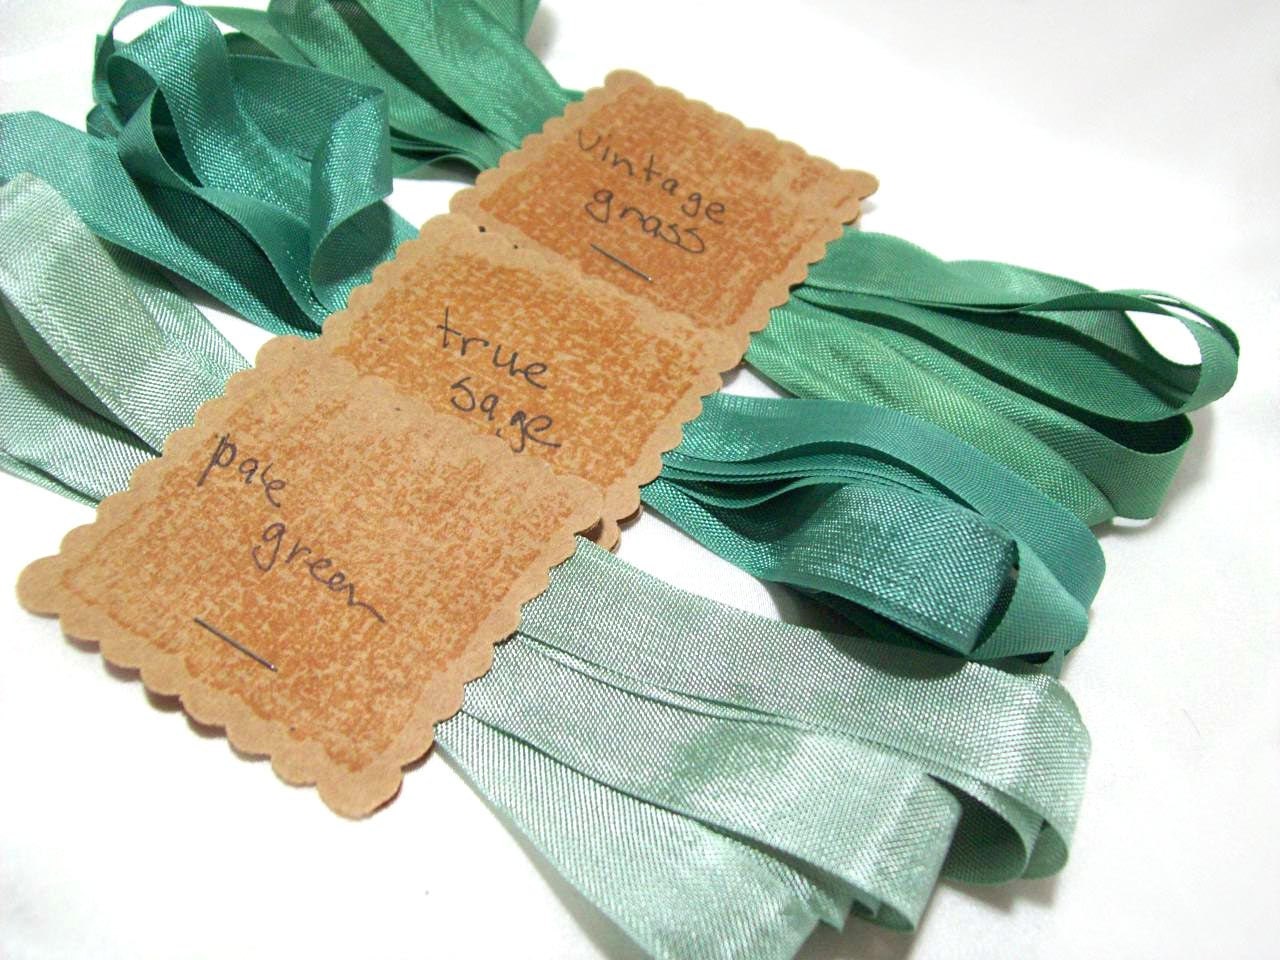 Seam binding in true sage, vintage grass green, and pale green- 3 yards each, totaling 9 yards